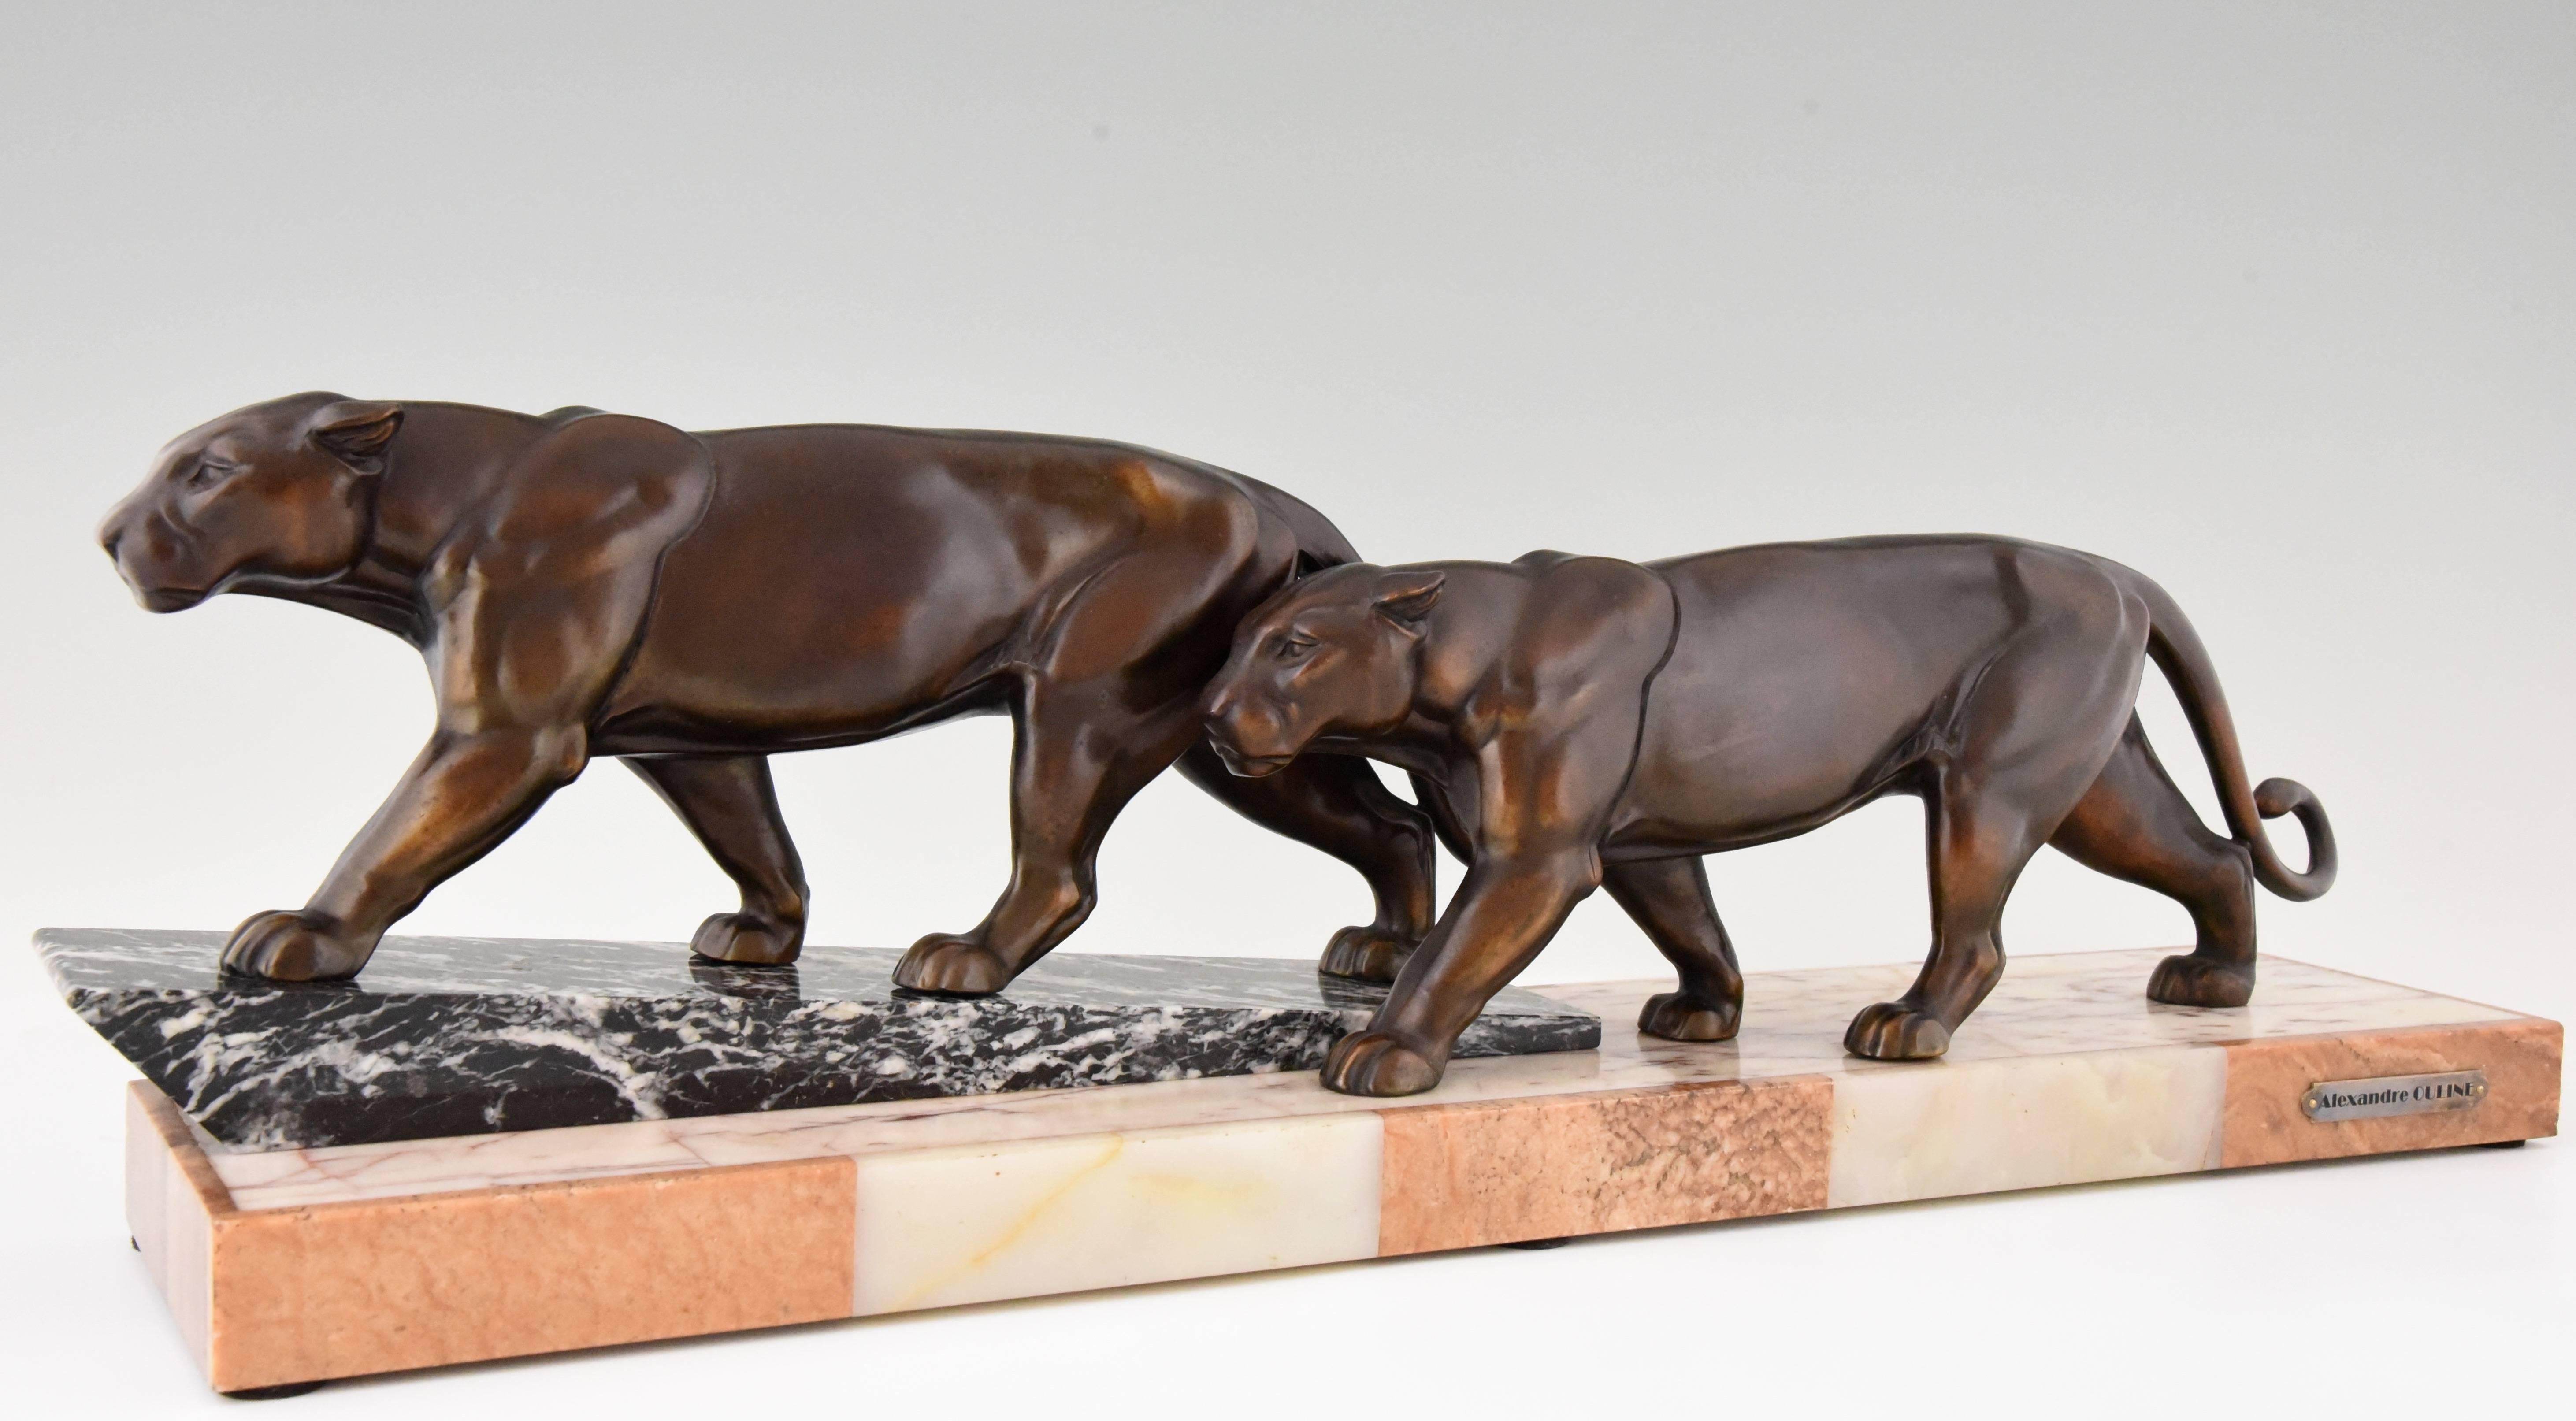 20th Century Art Deco Sculpture of Two Walking Panthers by Alexandre Ouline, 1930 France